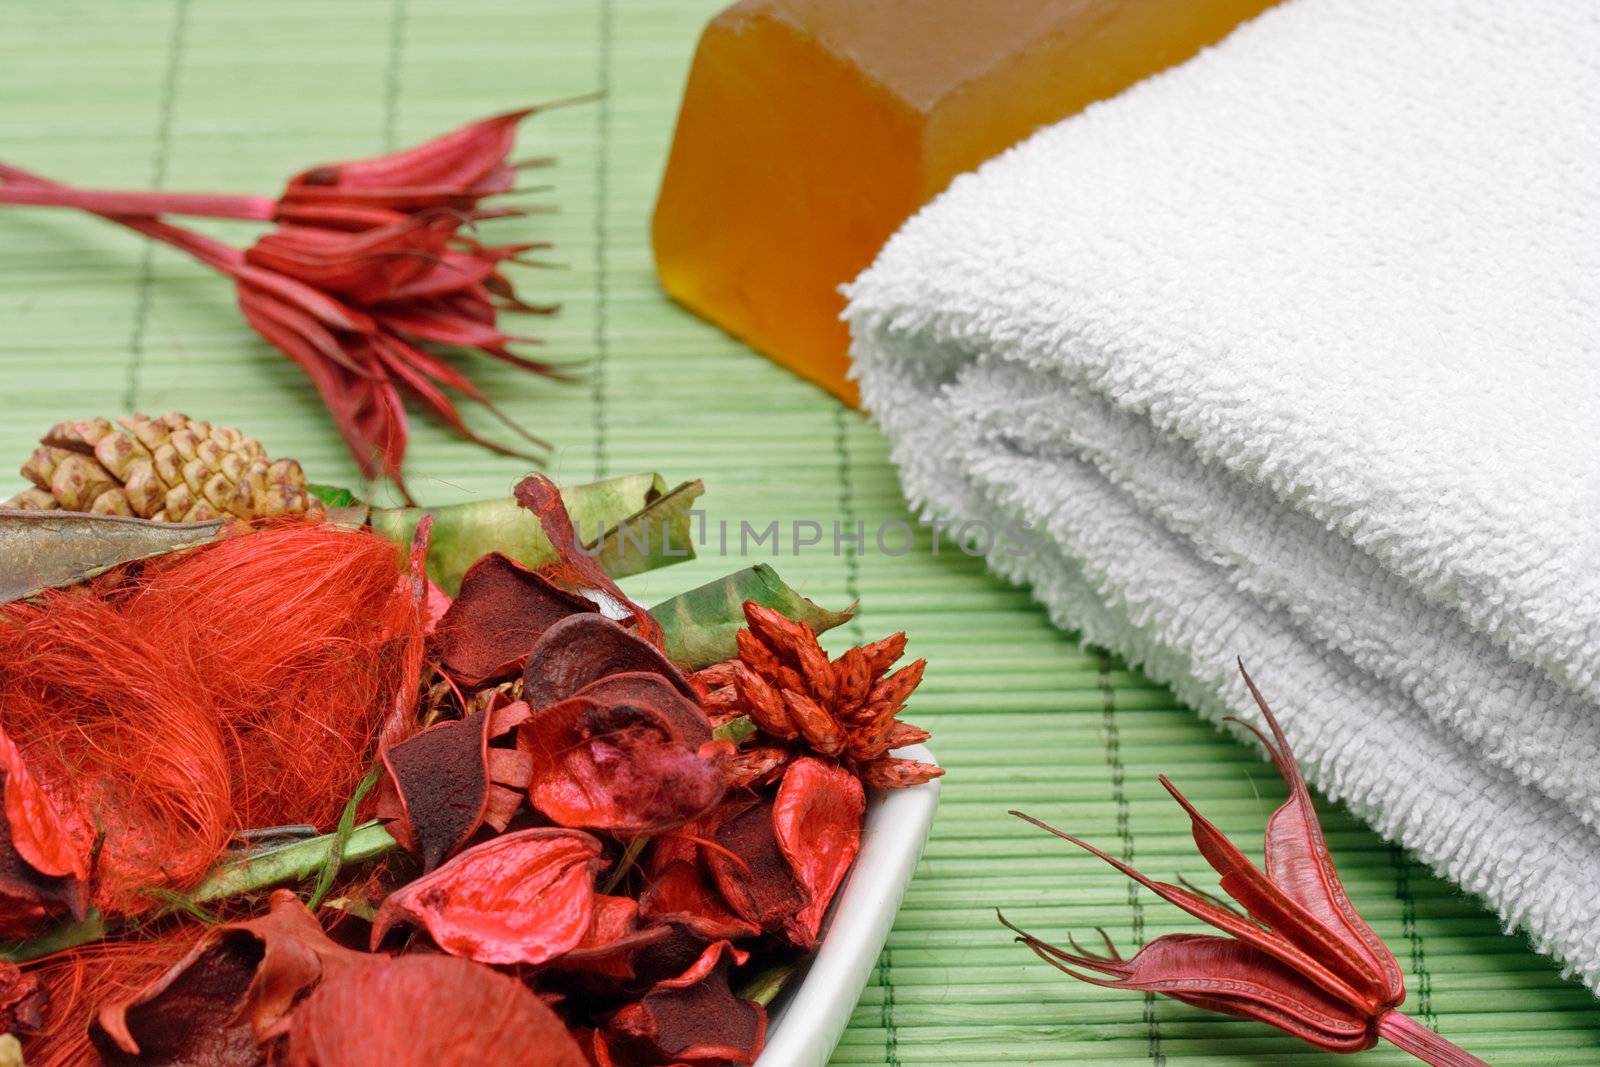 Green and red spa ingredients by Hbak